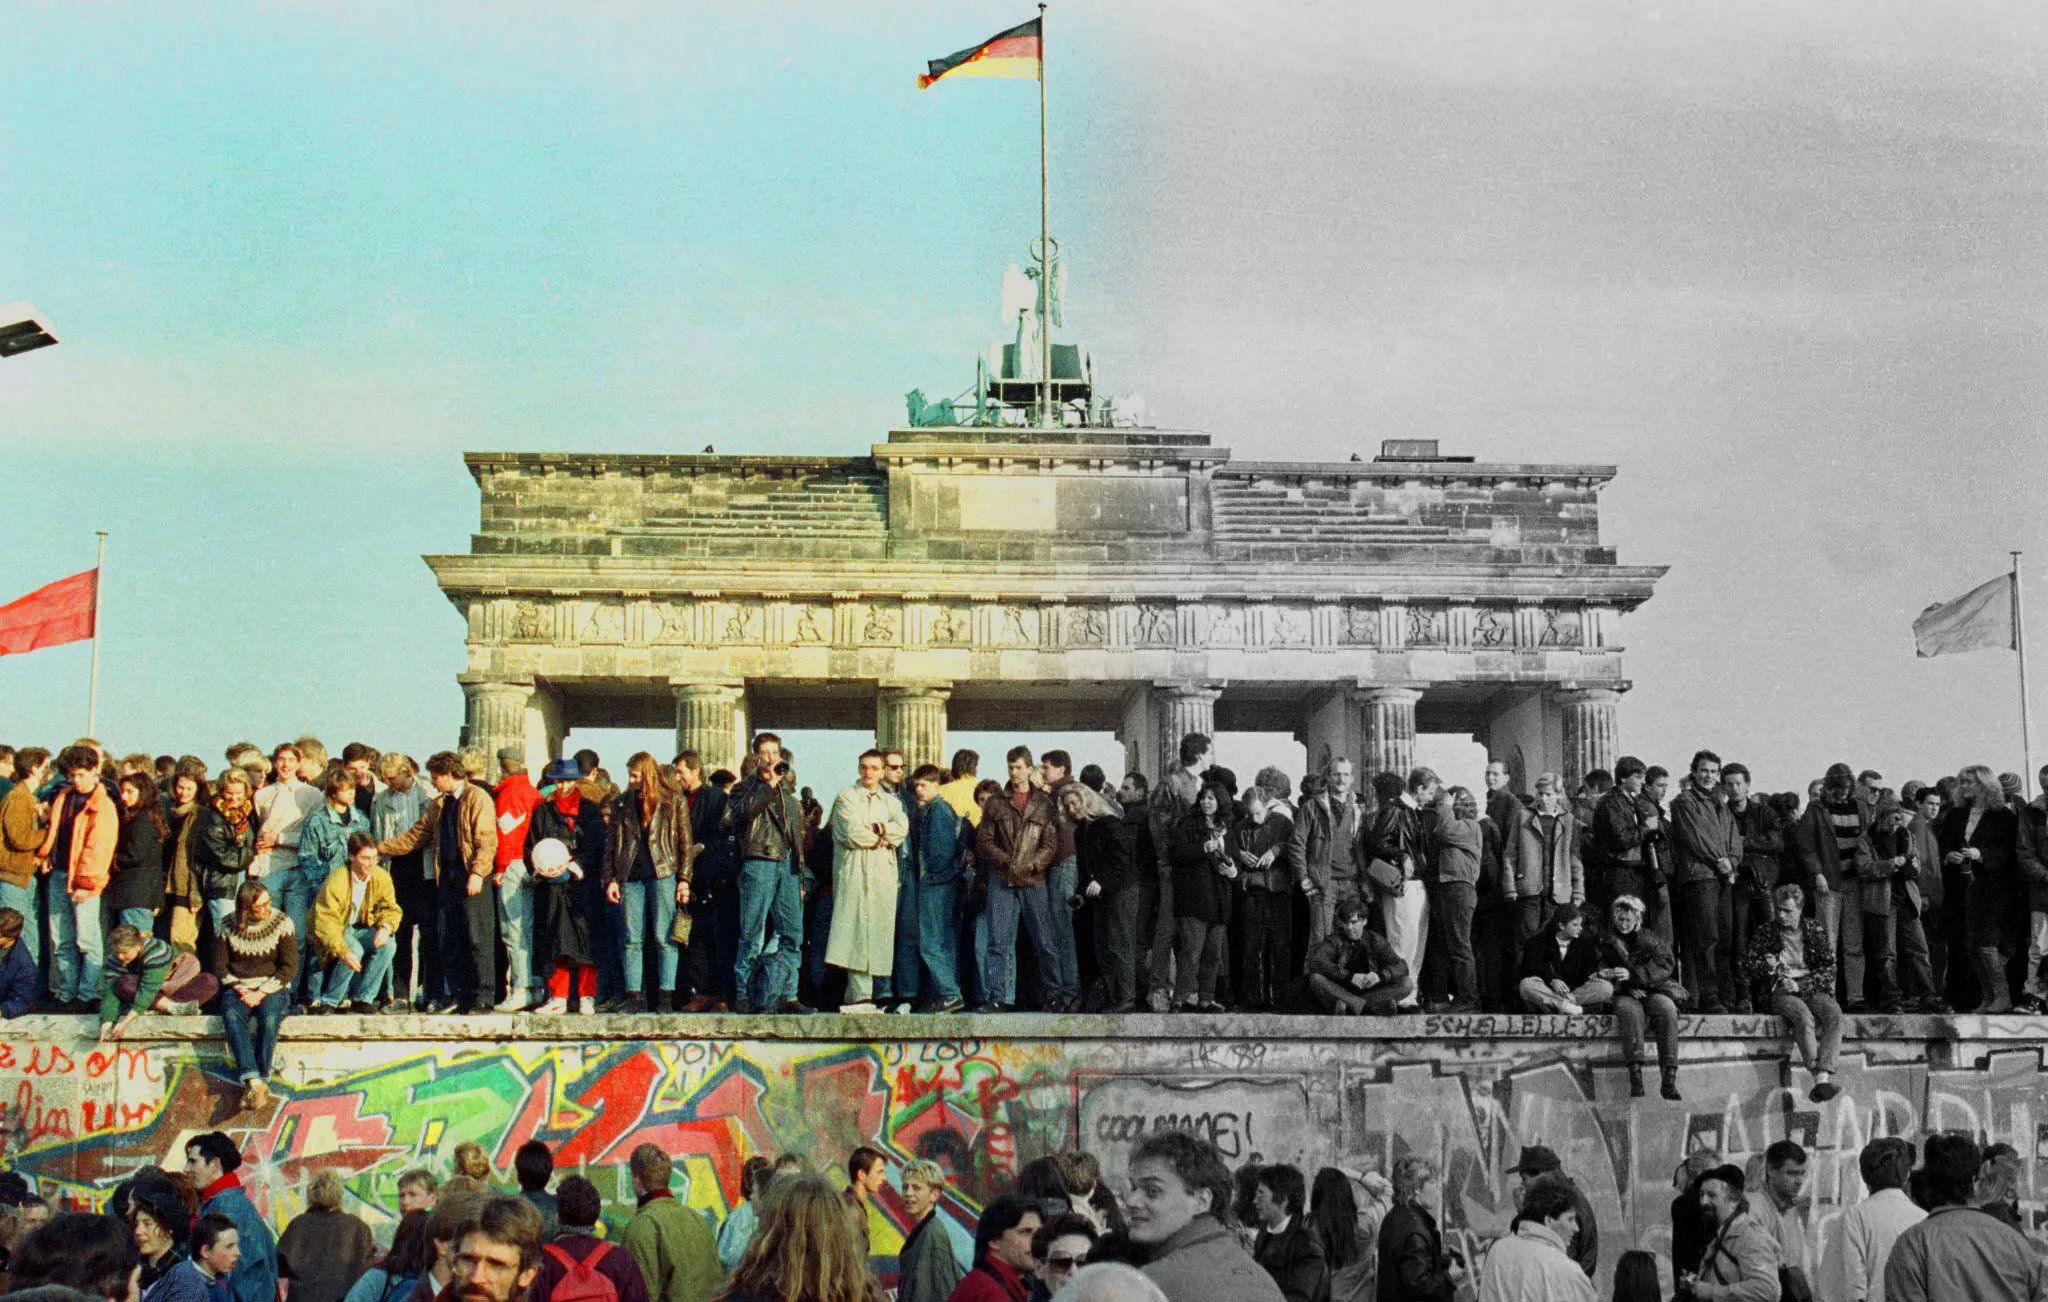 The Brandenburg Gate with a German flag during the period of reunification in Berlin, Germany 